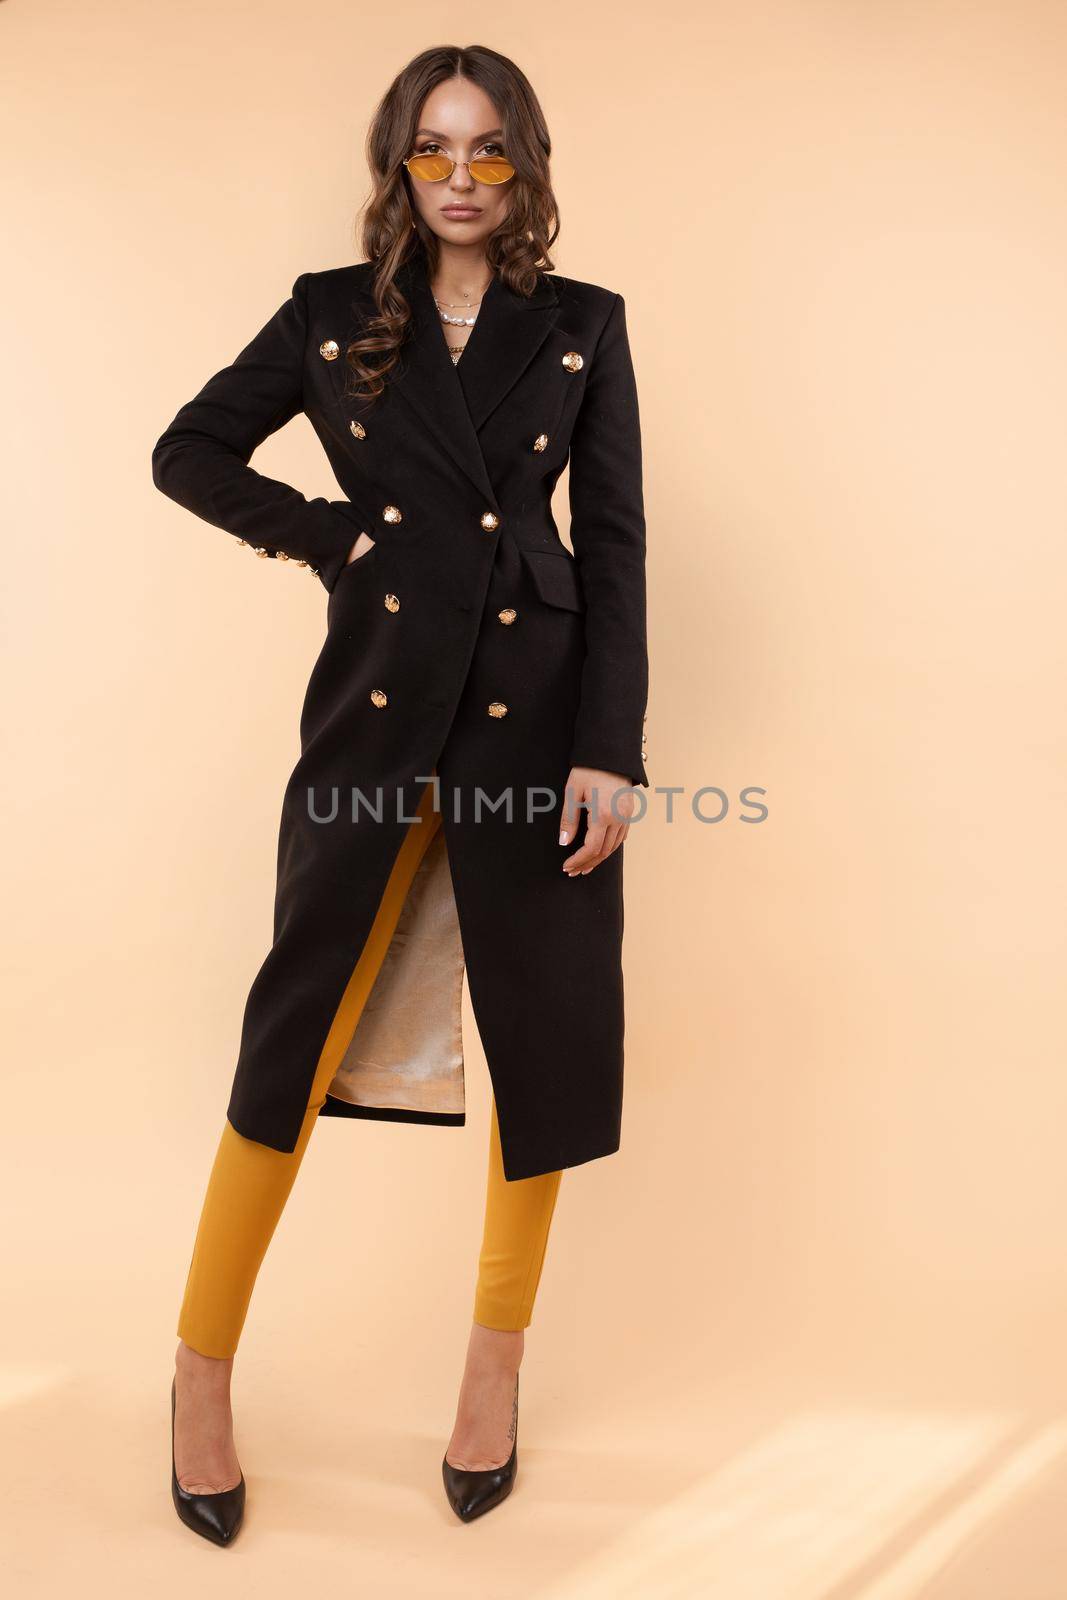 Full length fashionable portrait of gorgeous young brunette woman in trendy sunglasses, black double-breasted coat and black high heels. Wavy hair, looking at camera. Isolate on plain background.